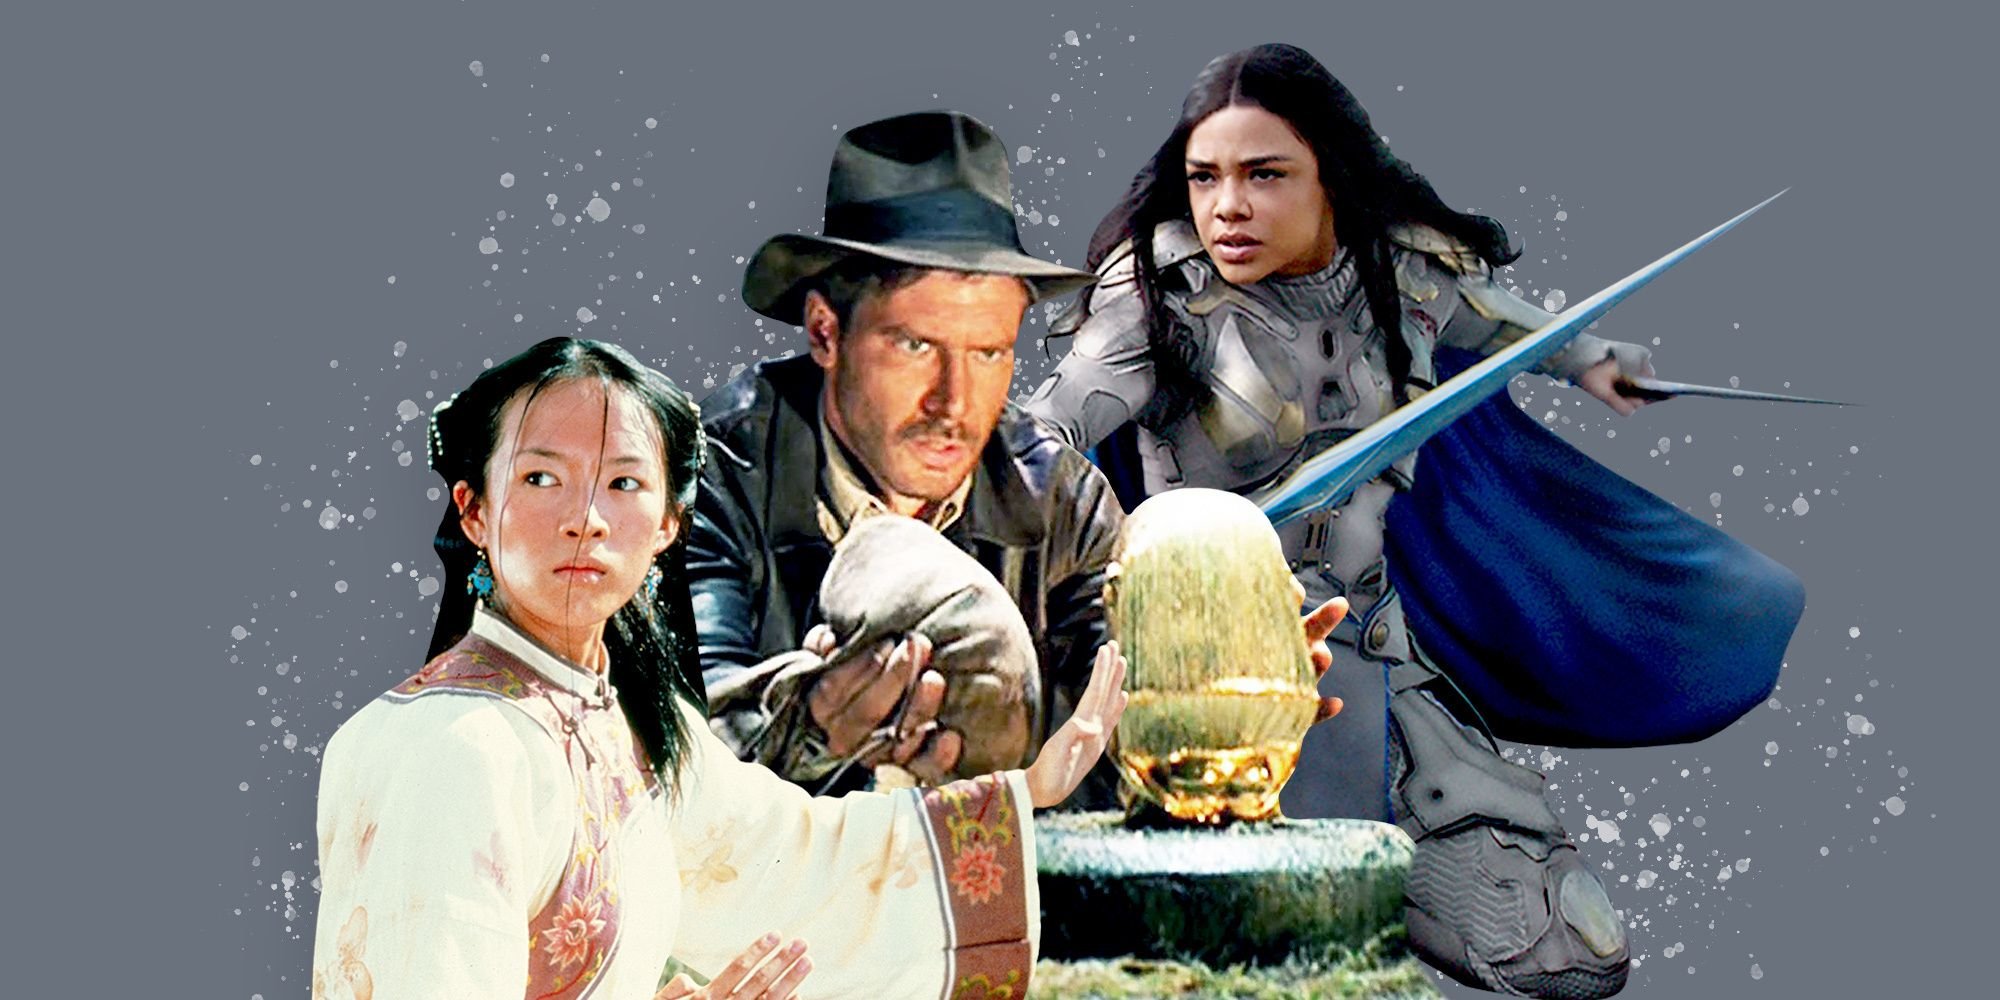 The Best Adventure Movies of All Time To Set Off Into the Great Unknown